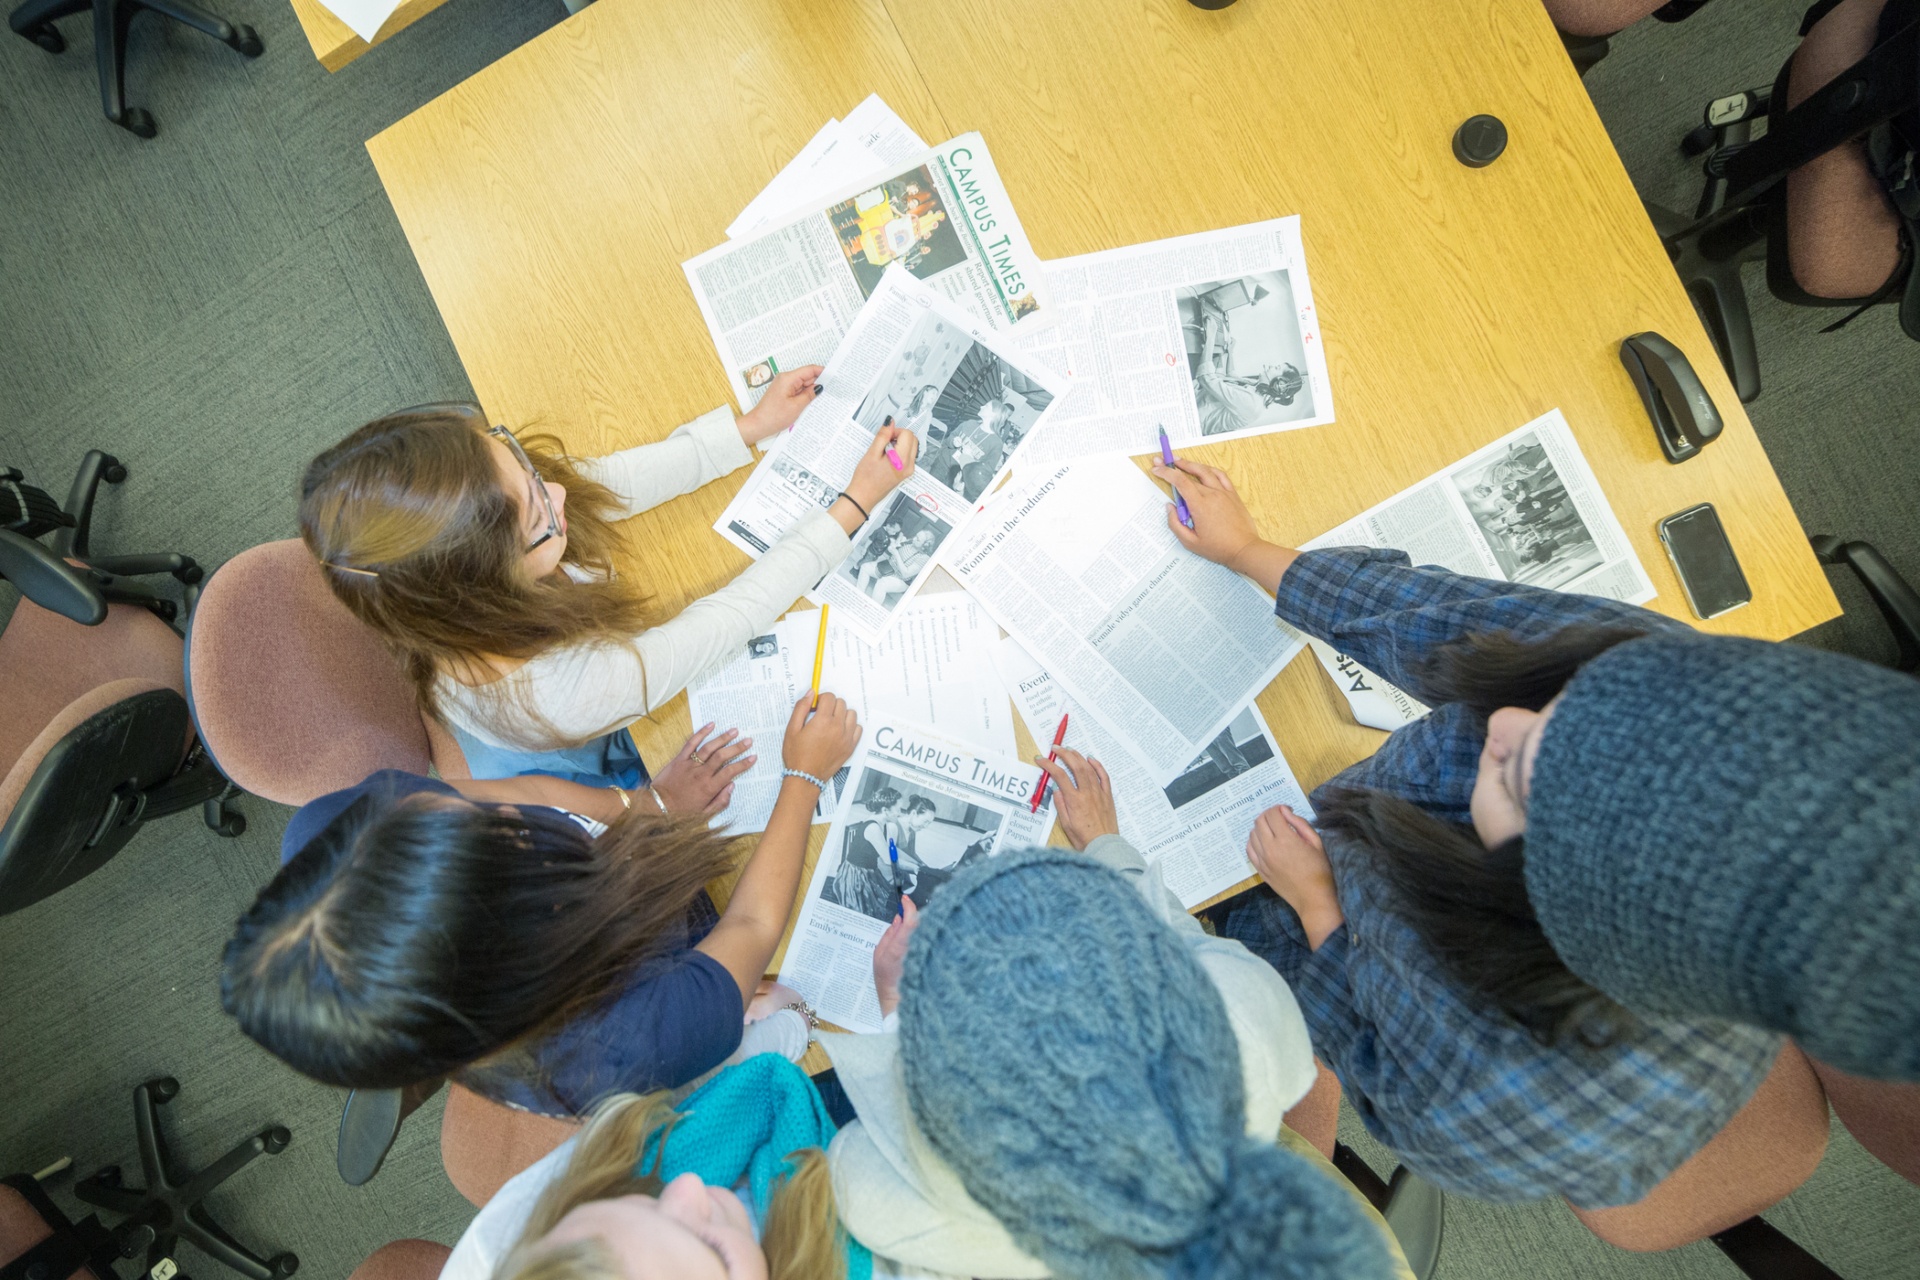 University of La Verne students work on the Campus Times newspaper.